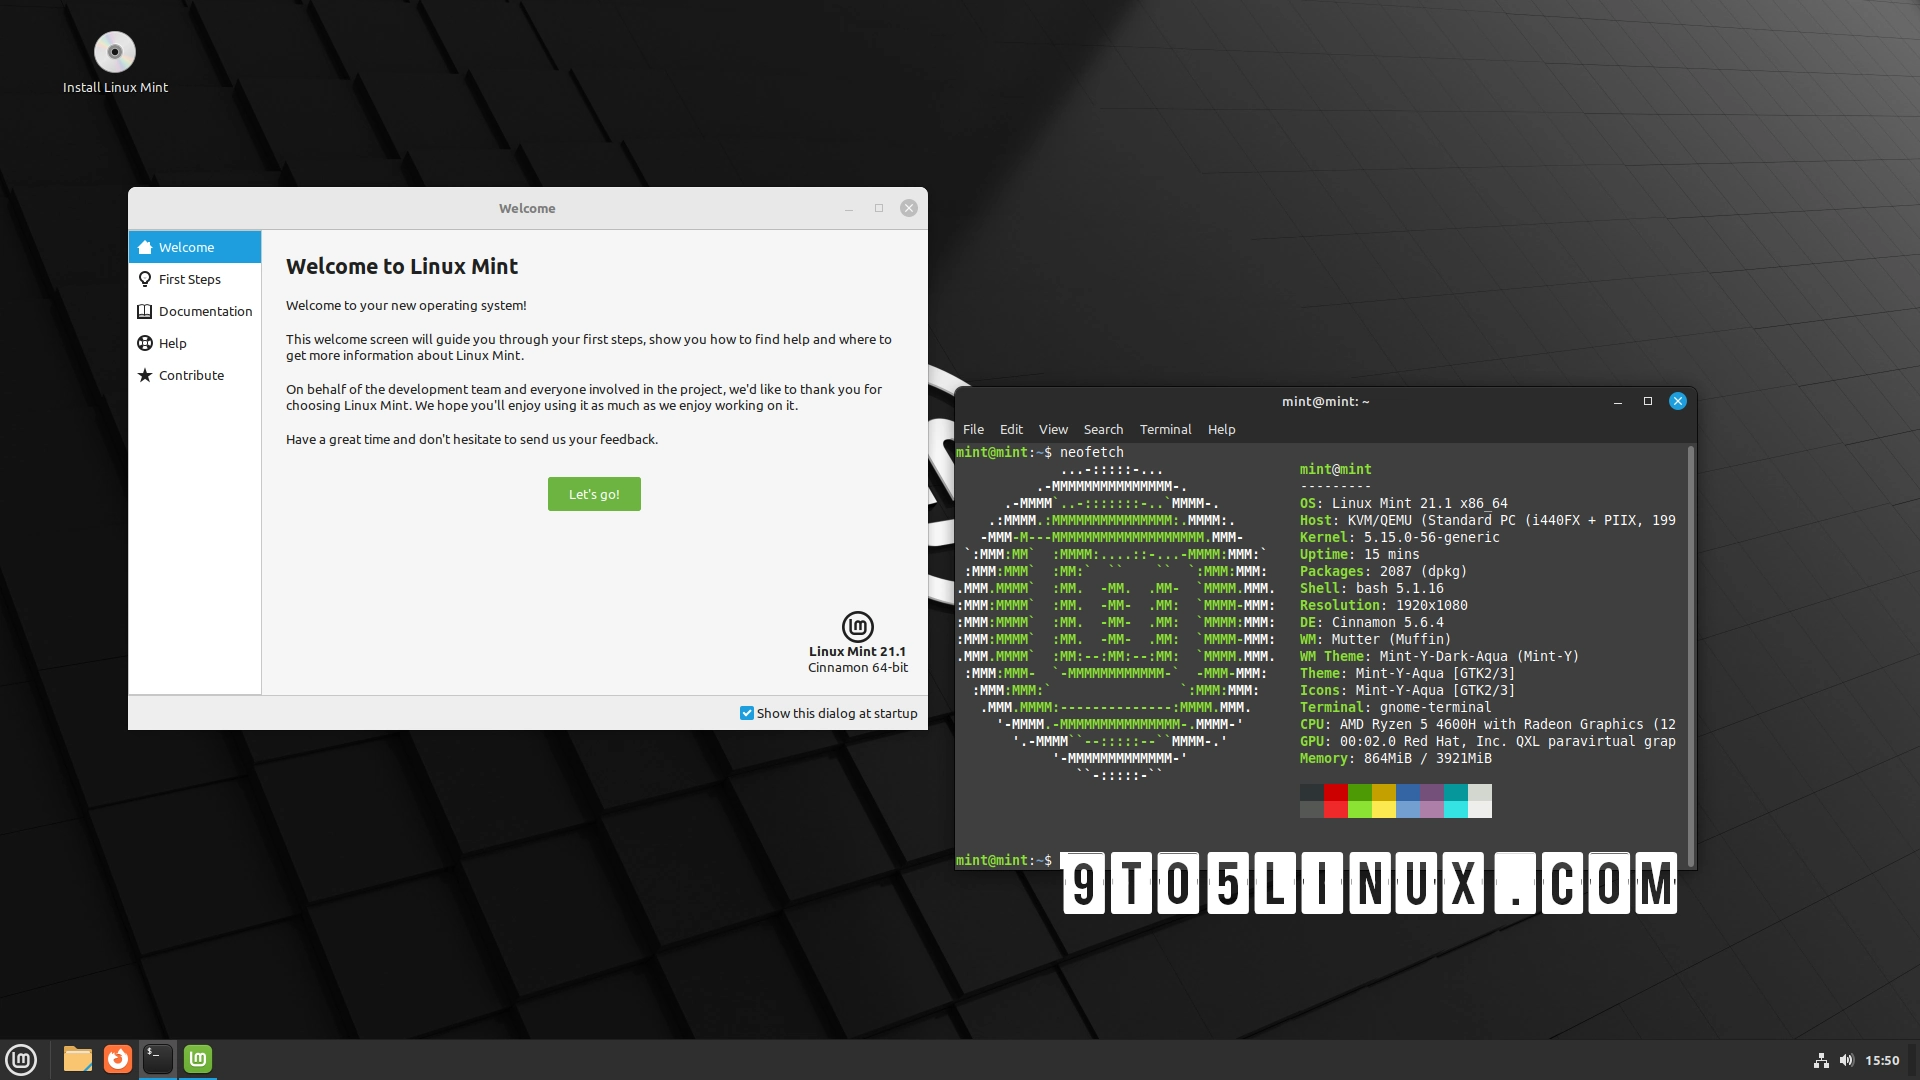 First Look at Linux Mint 21.1 Beta with the Cinnamon 5.6 Desktop Environment